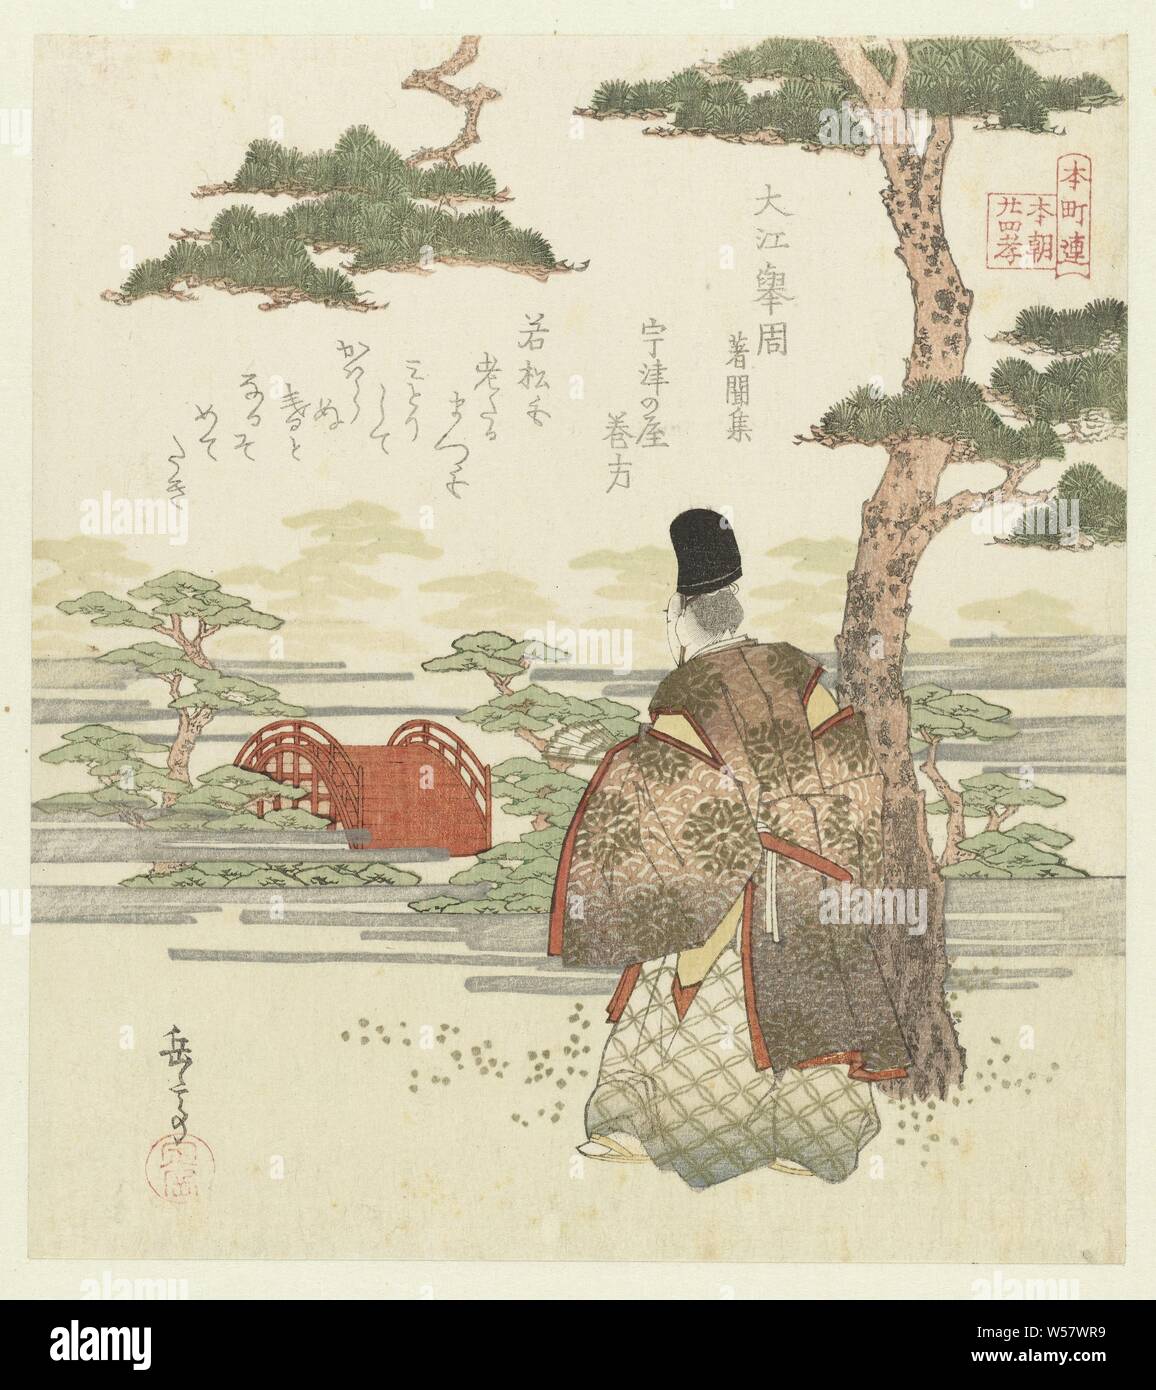 Twenty-four Japanese examples of branch piety for the Honors (series title), no Takachika (1000-1046) from the noble Daizaifu family looking at the beauty of its gardens. The poem is an allusion to the old pine tree in the foreground and that all pine trees turn green with new year, trees: pine, Yashima Gakutei (mentioned on object), Japan, 1820 - 1825, paper, colour woodcut, h 211 mm × w 187 mm Stock Photo